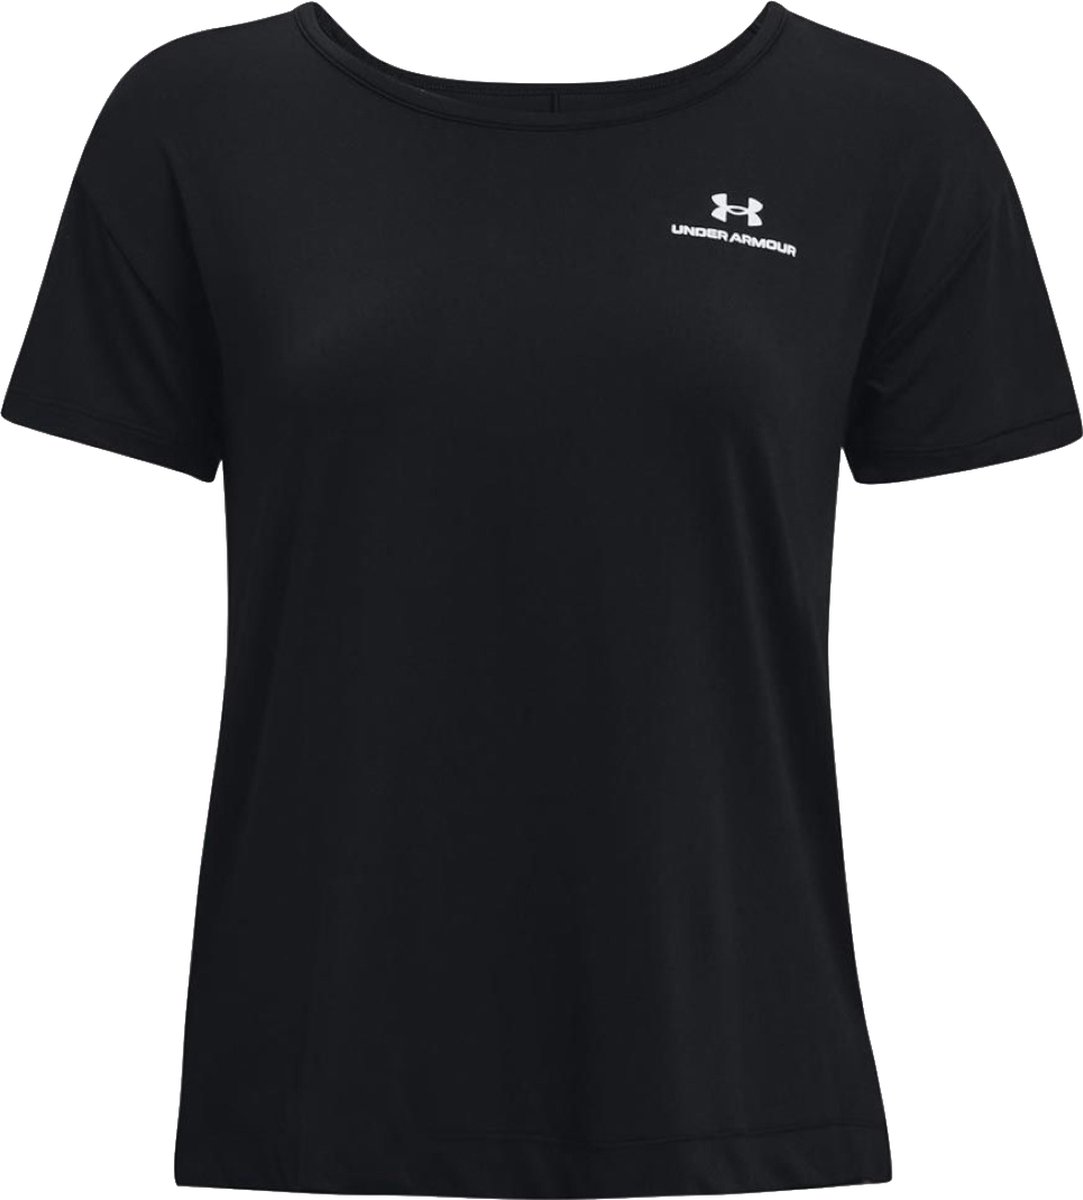 Under Armour Rush Energy Ss-Blk - Maat SM